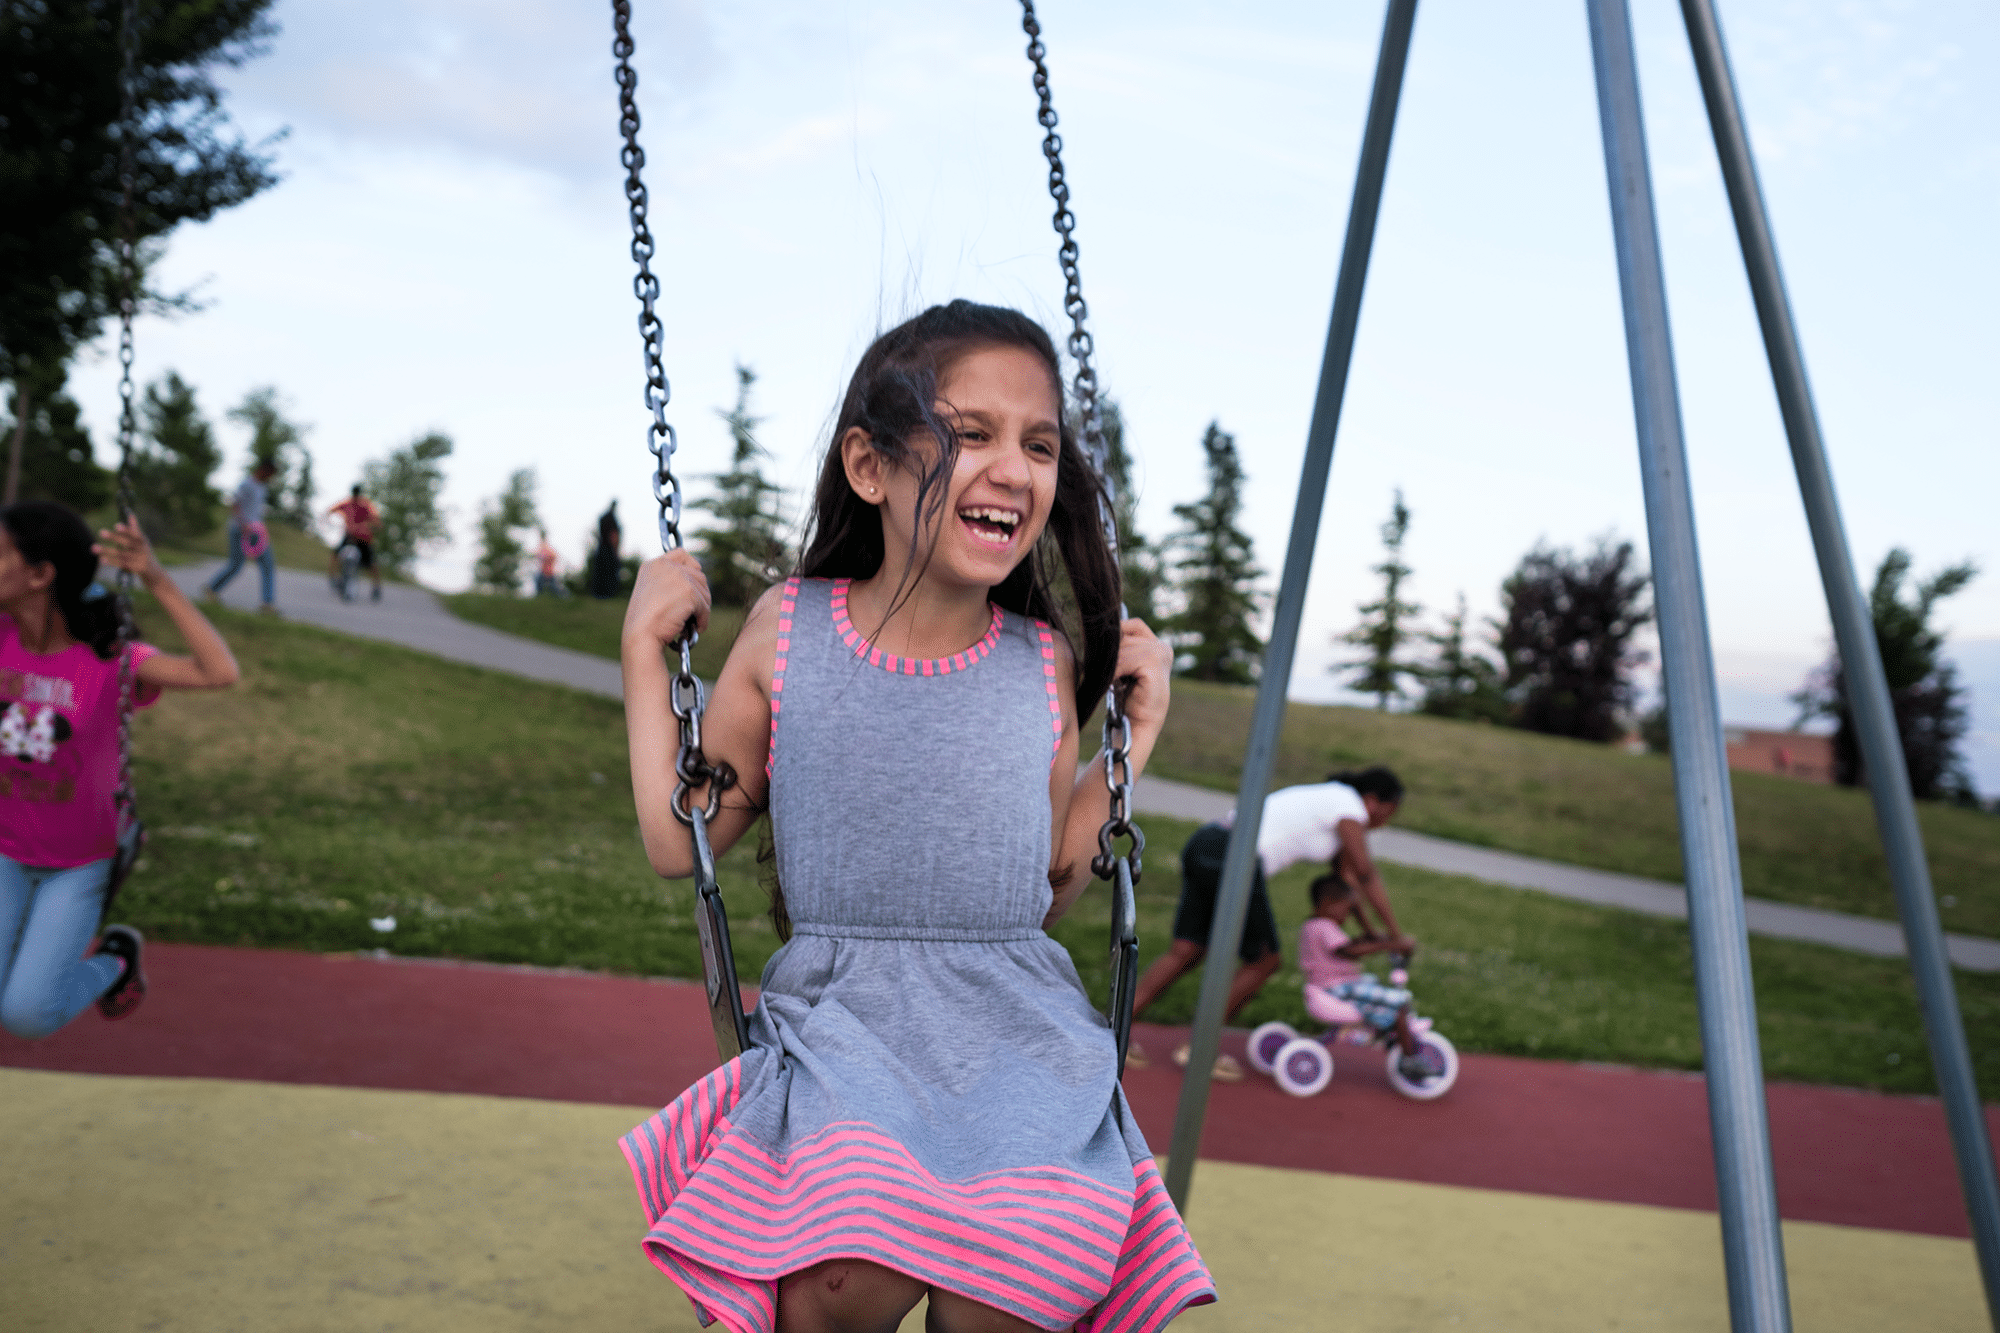 Syrian refugee Maryam is seen on a swing in the park.